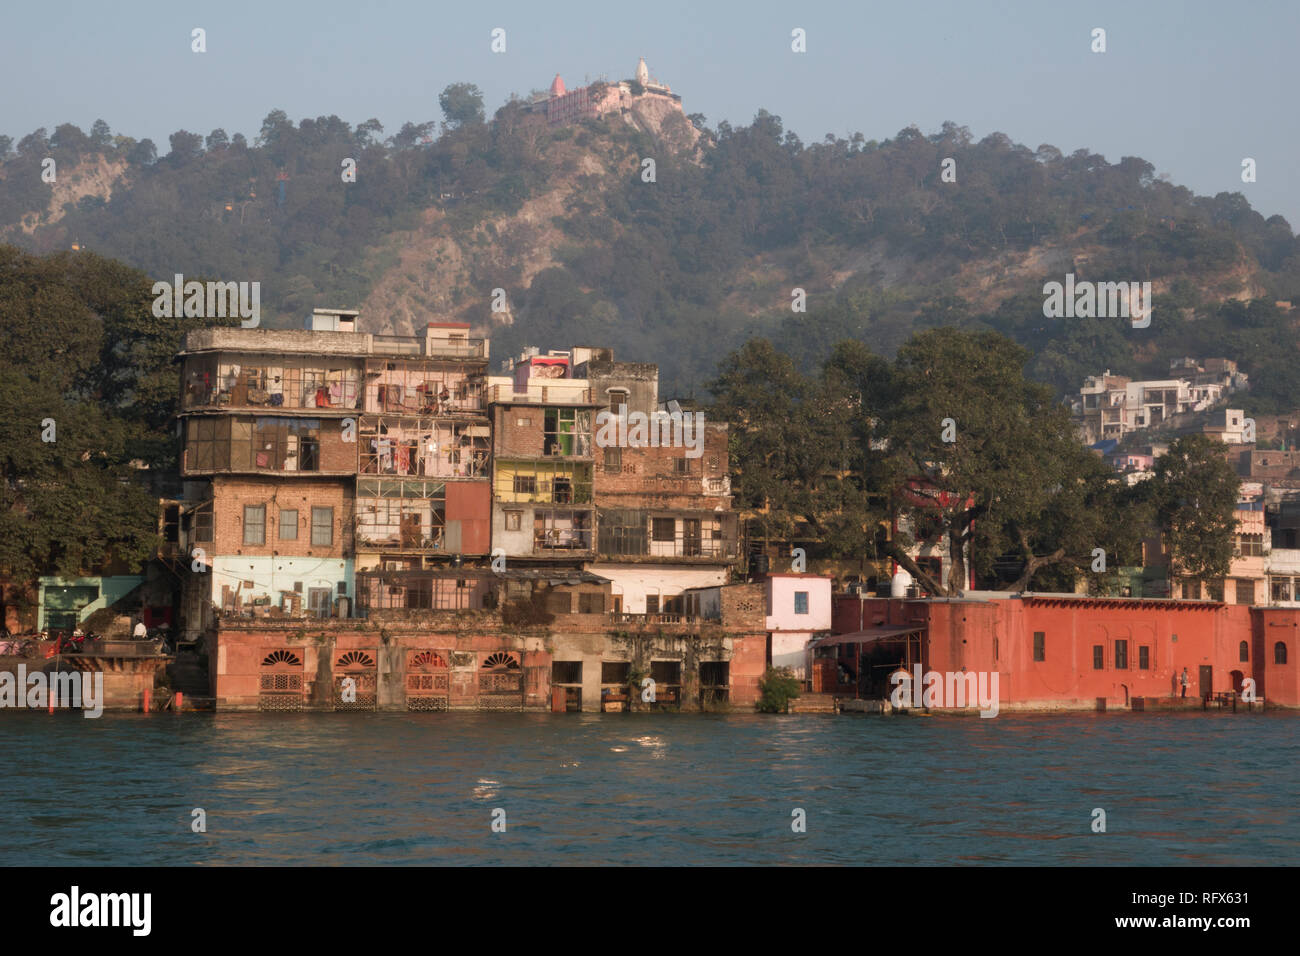 Riverfront buildings on the Ganges River at Haridwar, Uttarakhand, India Stock Photo